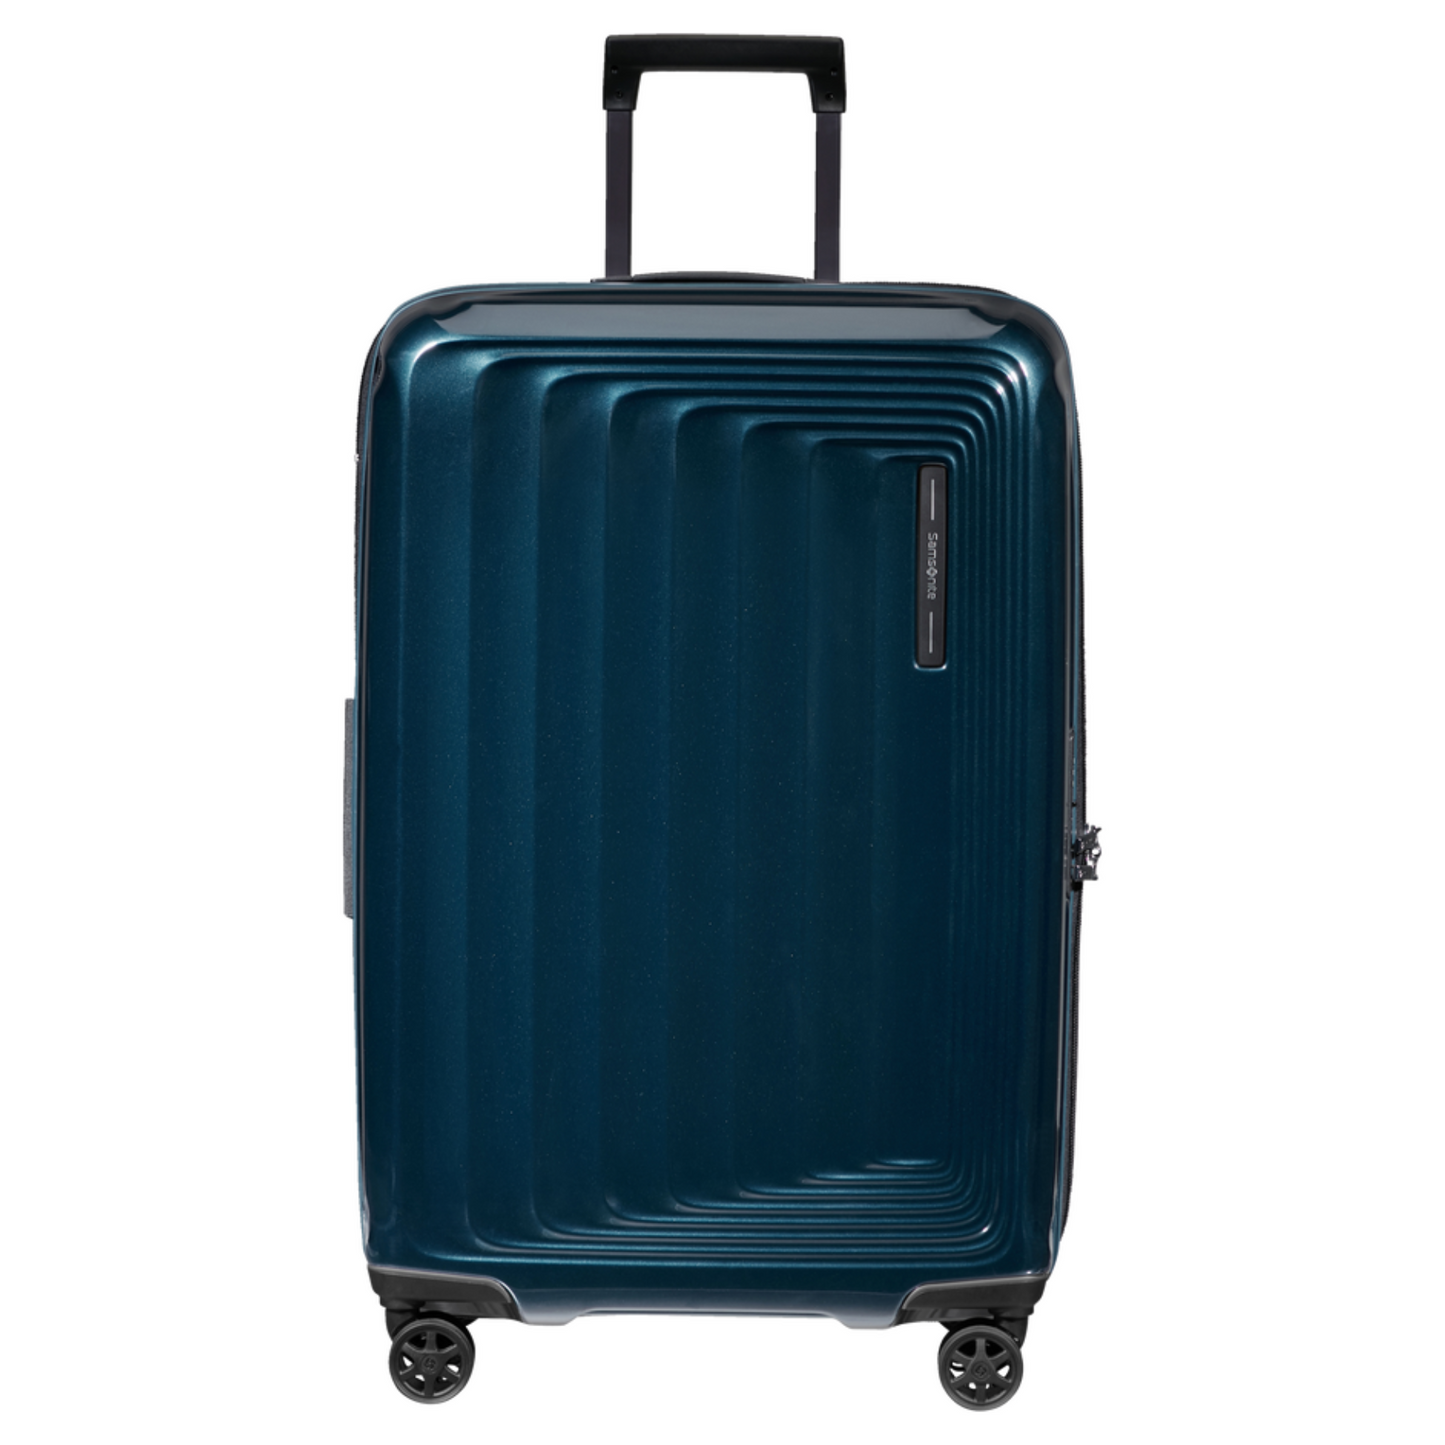 Valise Nuon 4 roues 69cm - Extensible